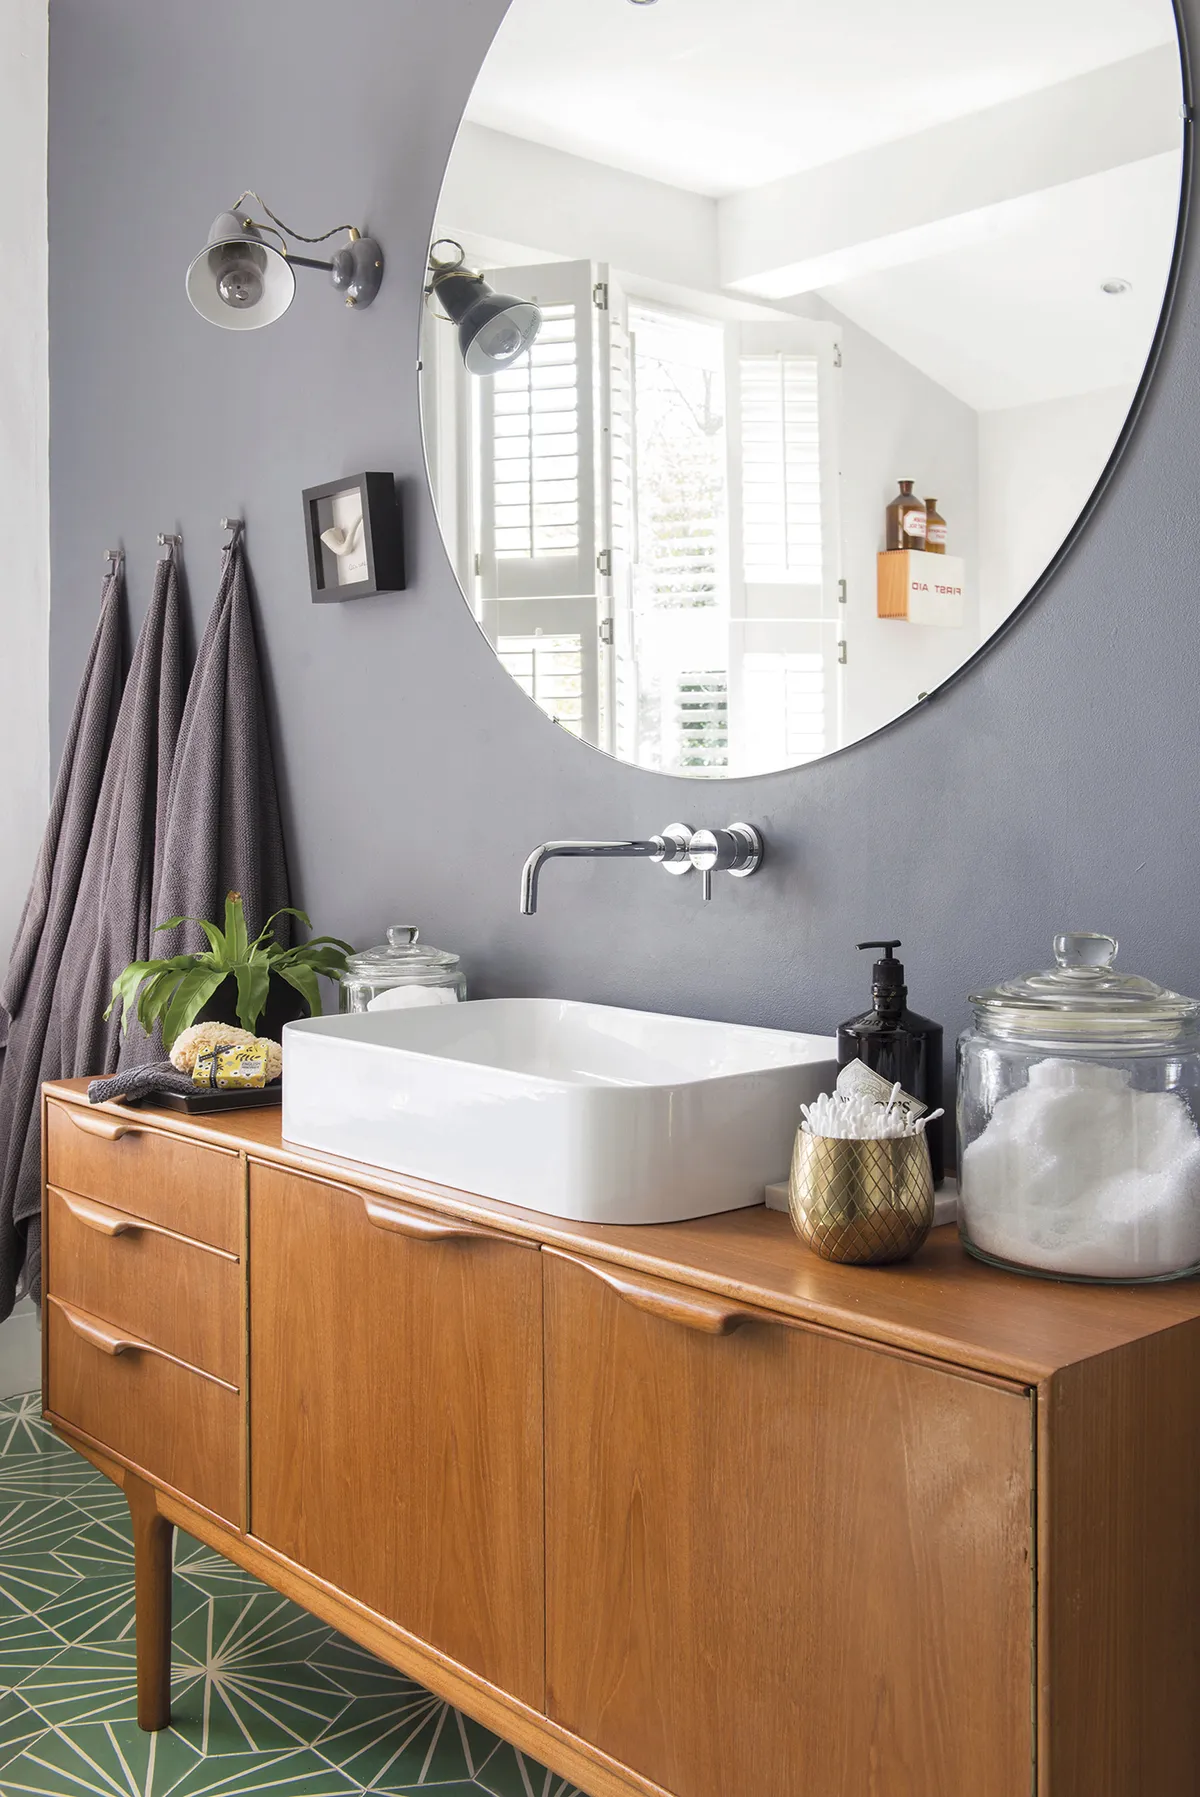 A large mirror from Leeds Glass helps to reflect light back into the space